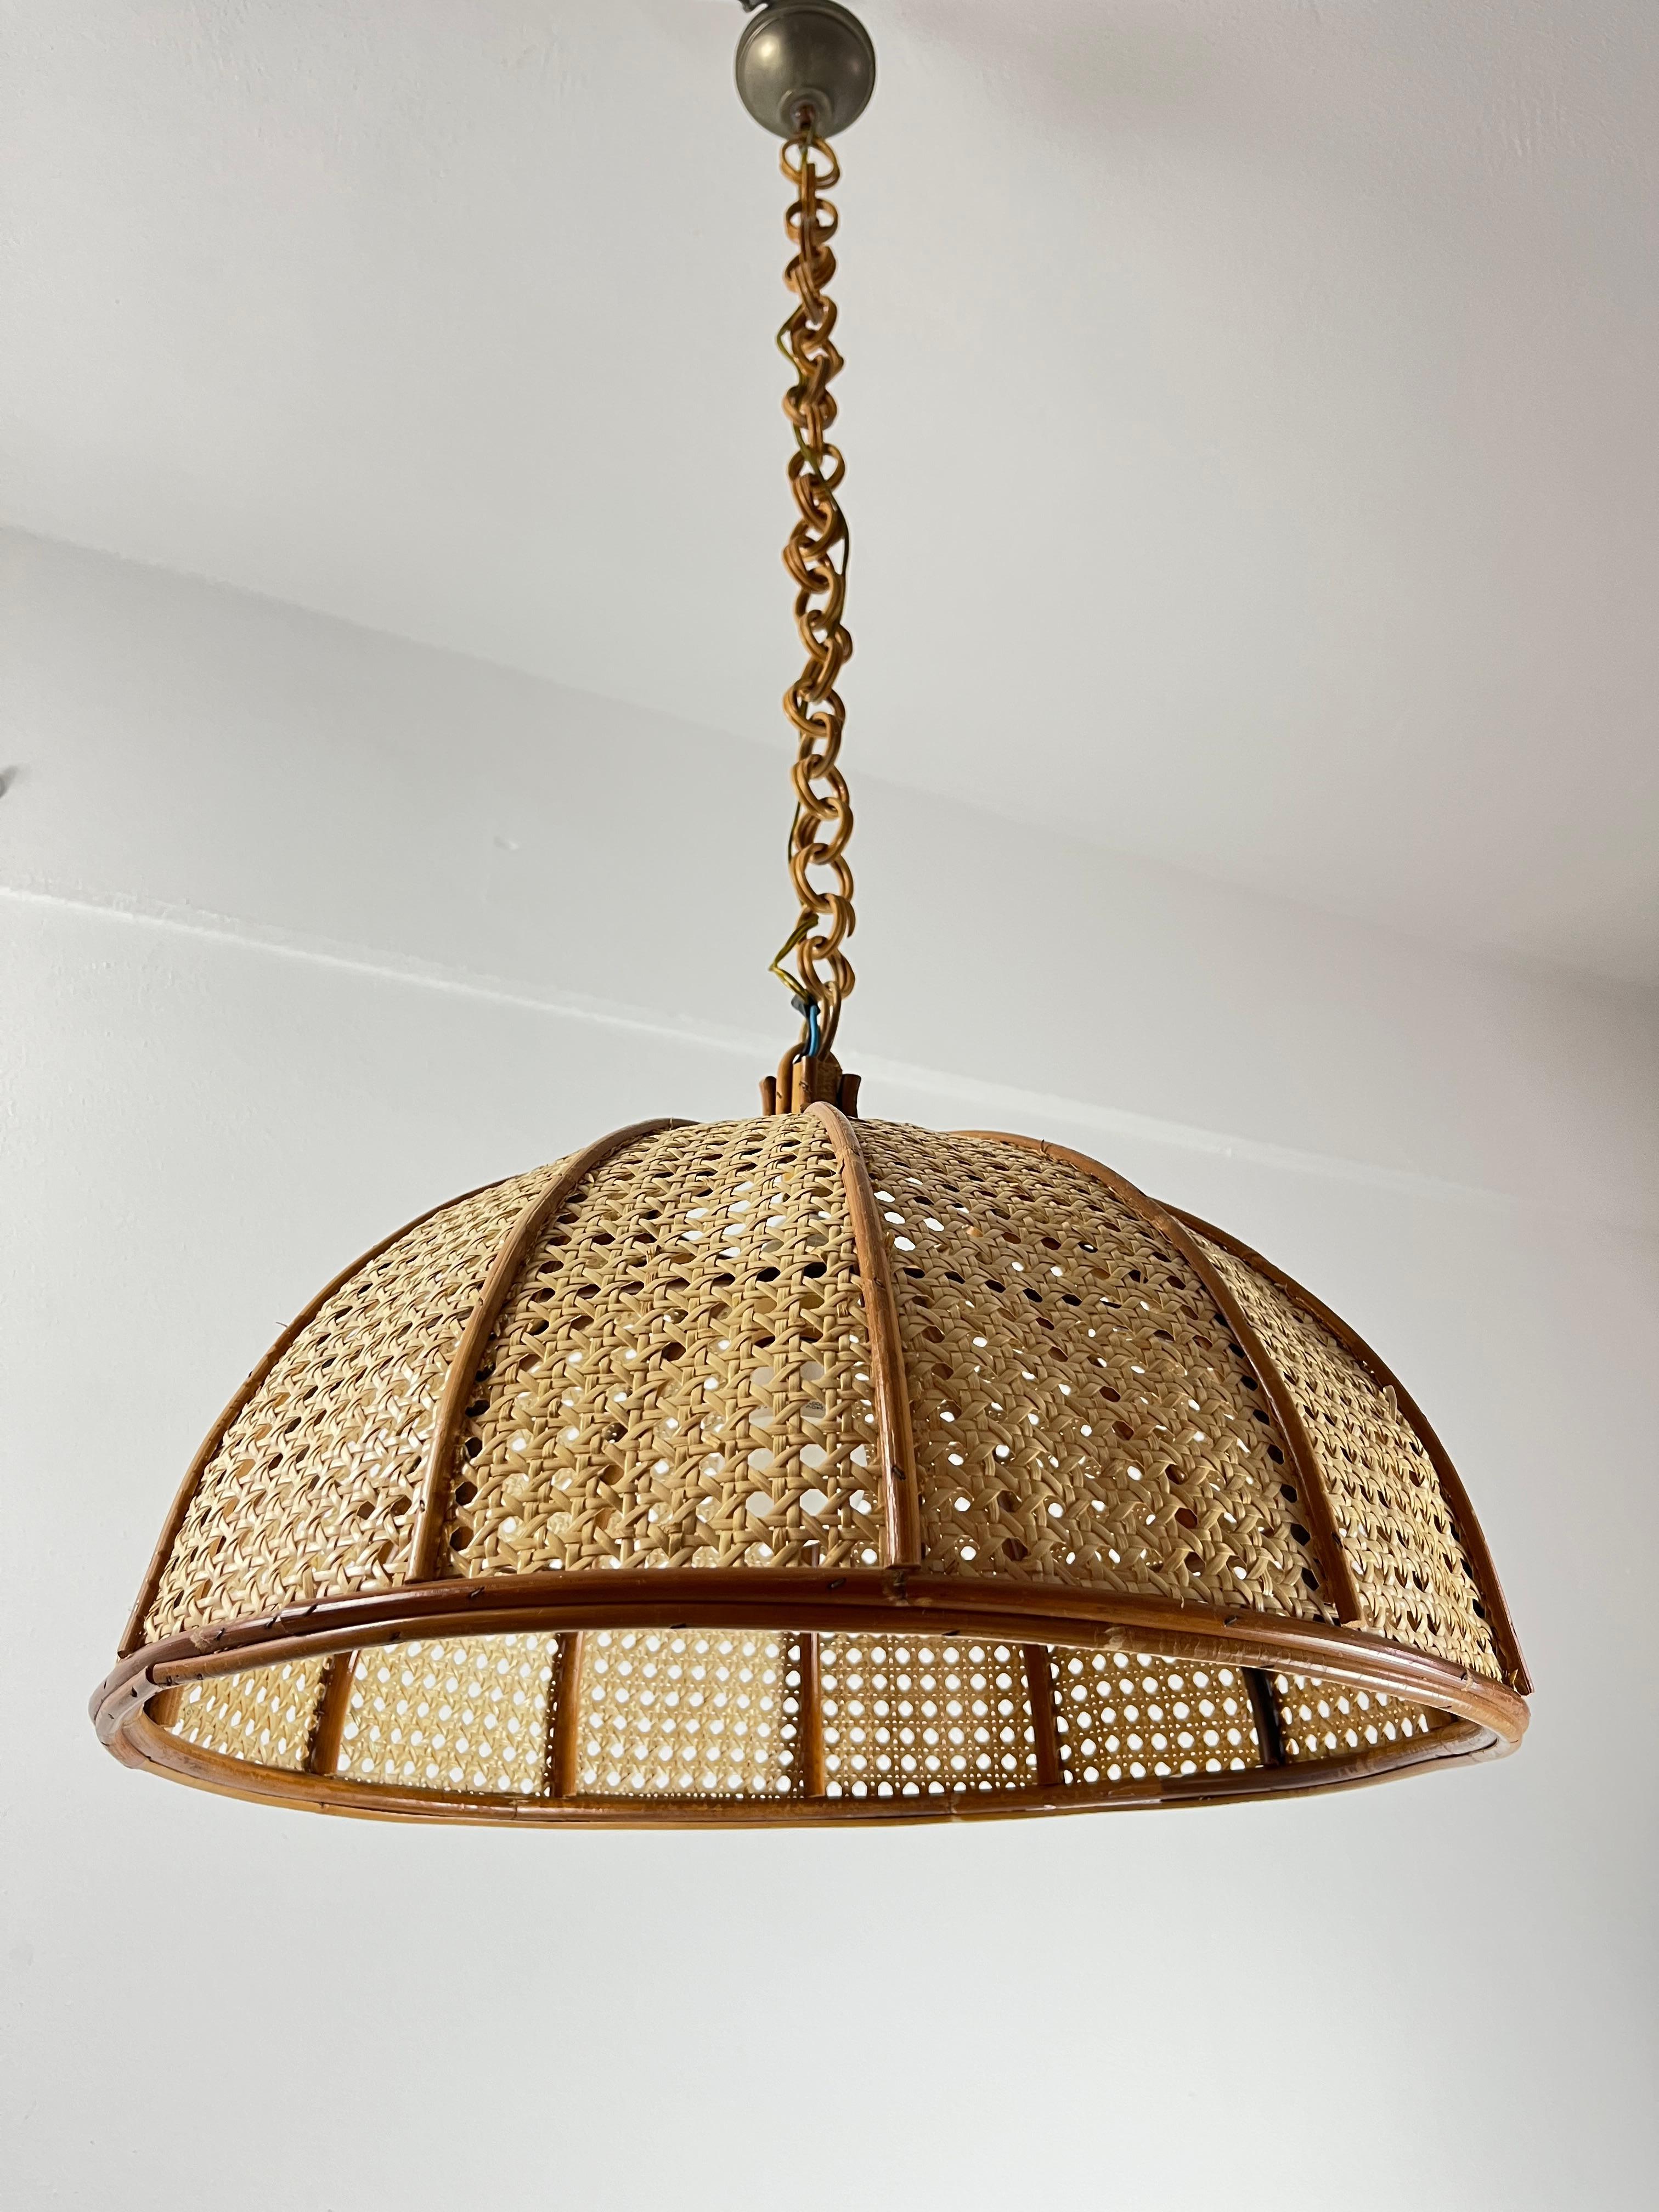 Bamboo and rattan pendant lamp, Italy, 1970s
Intact and working, E14 lamp socket.Good conditions. 
Found in a villa near the sea.